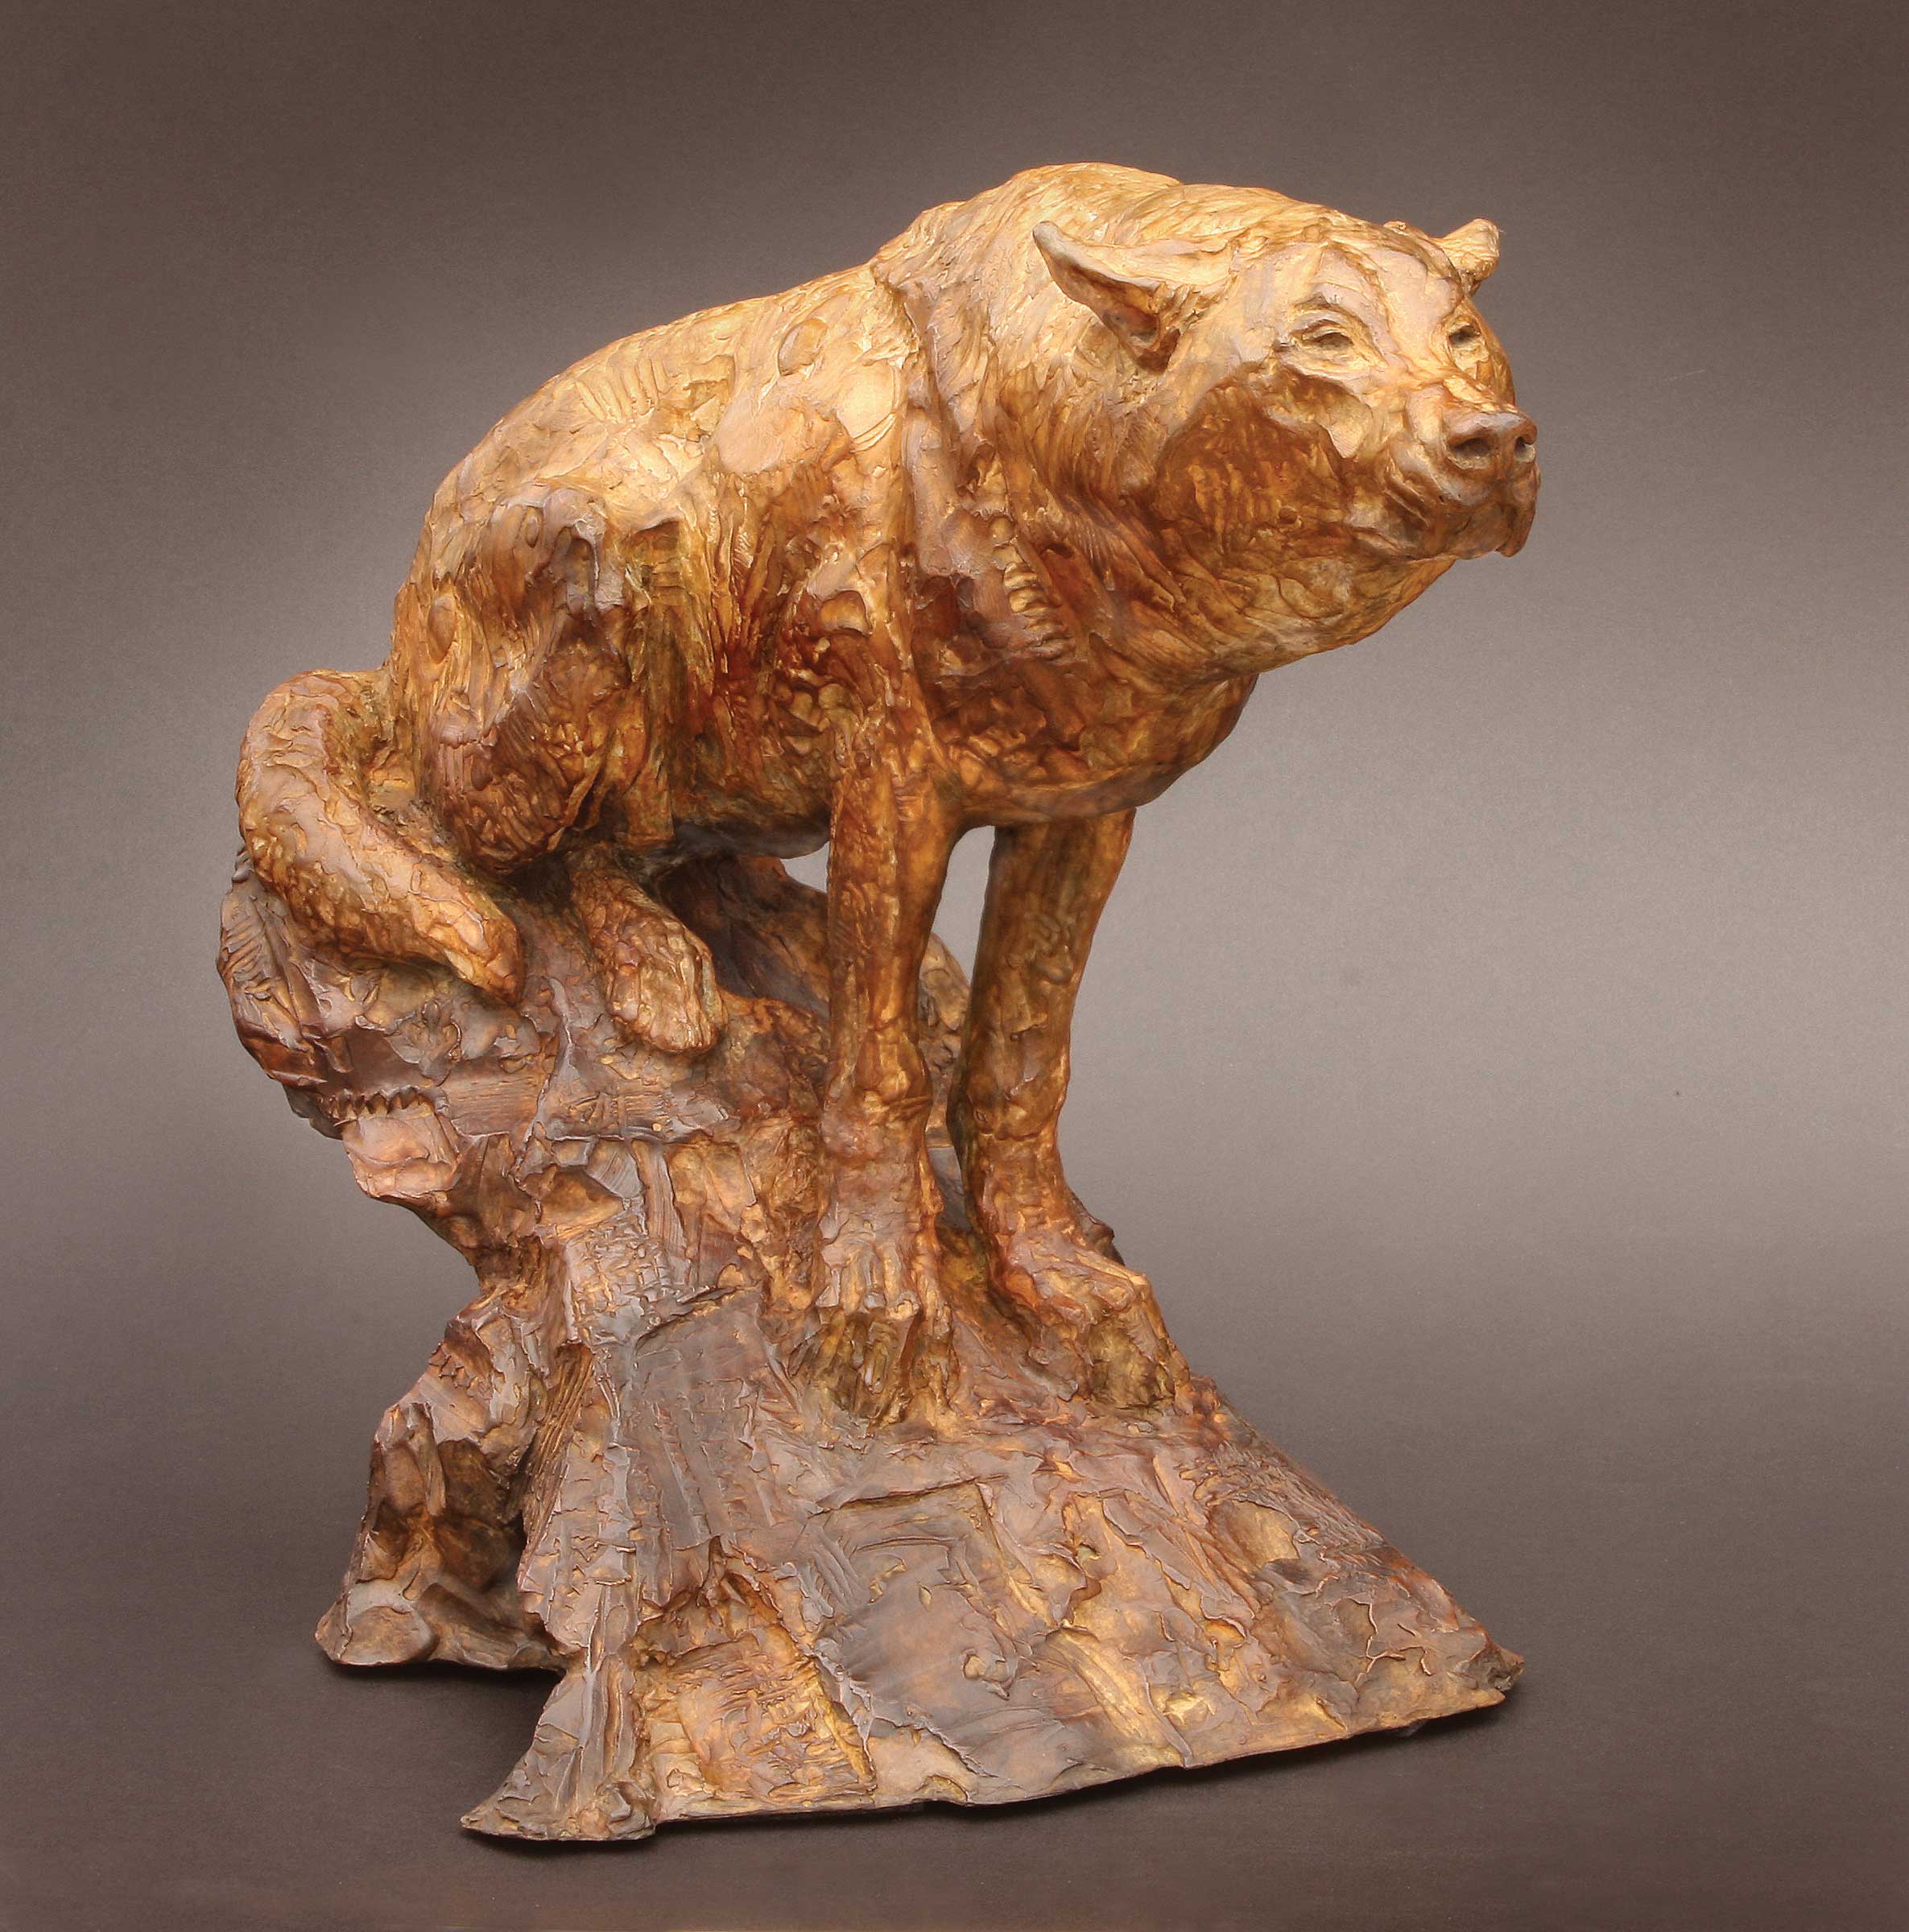 George Bumann, "Patience Is a Virtue," Bronze, 13 3/4 x 17 1/2 x 10 3/4 in., Plein air and studio